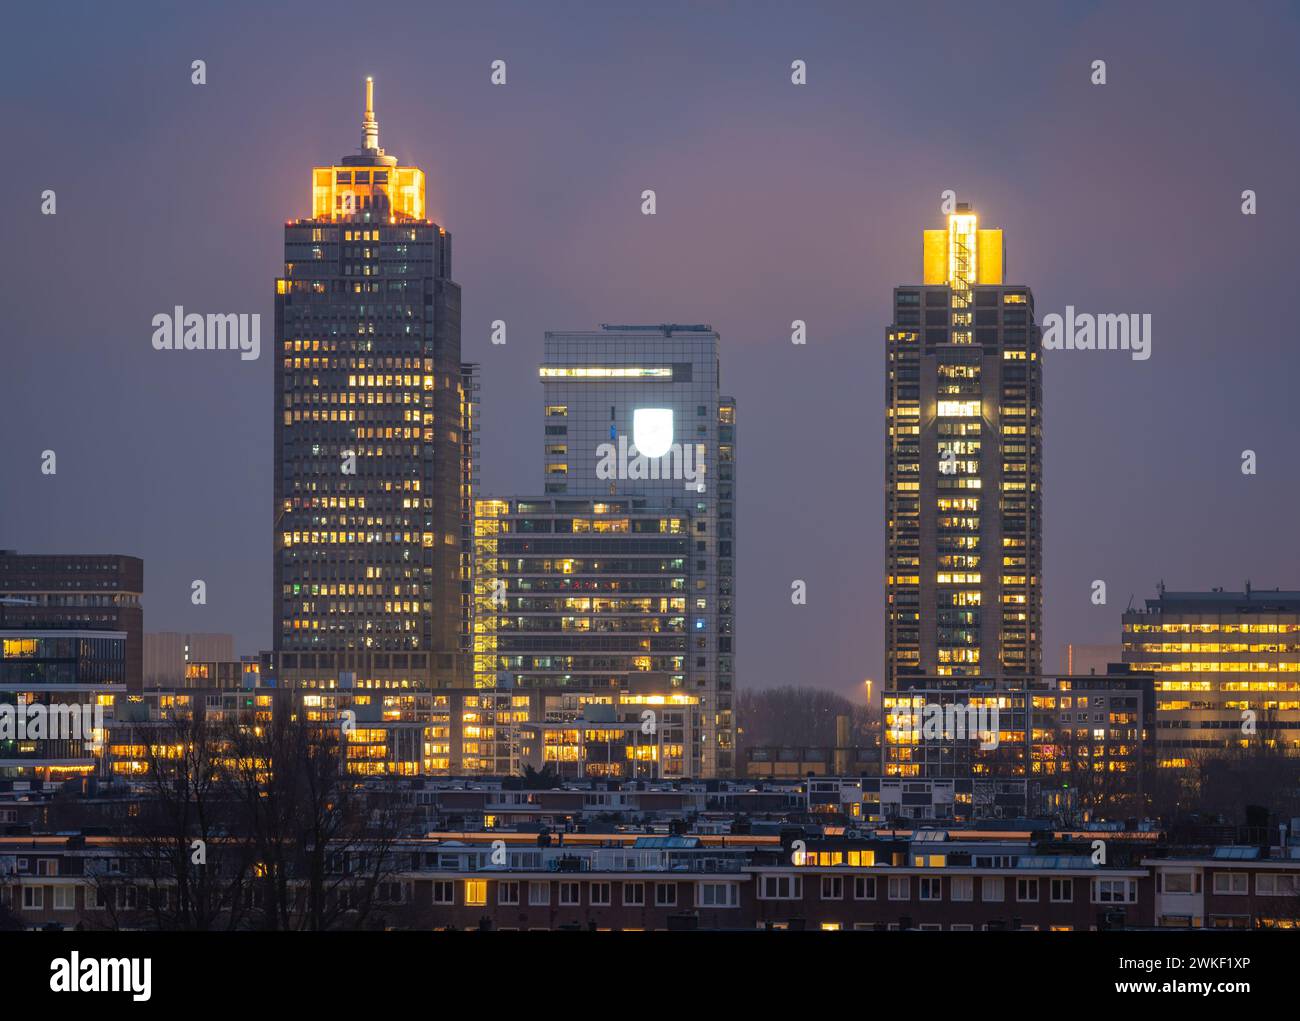 Skyline of Amsterdam at night, the tallest office towers nearby Amsterdam Amstel station Stock Photo